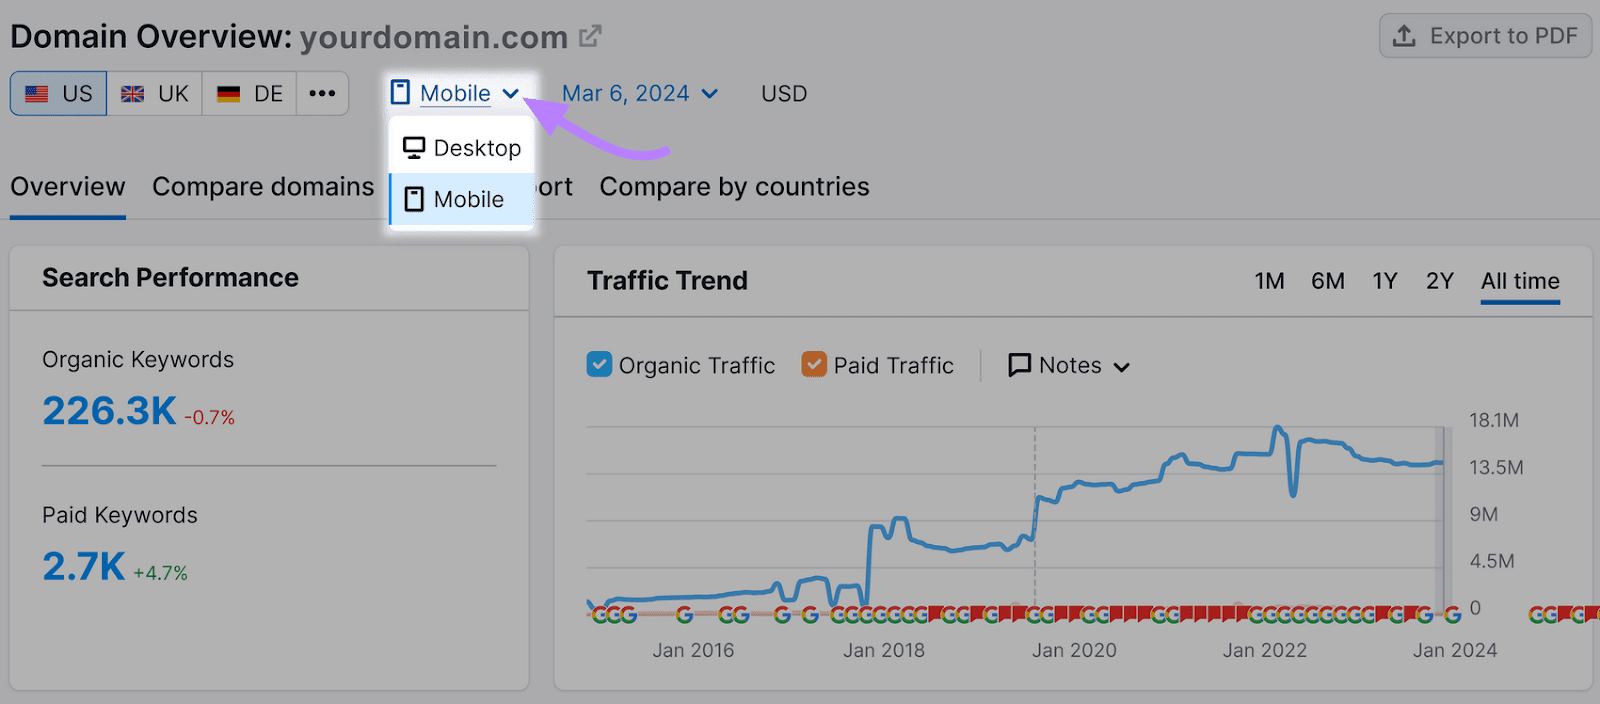 "Mobile" selected successful  Semrush's Domain Overview tool